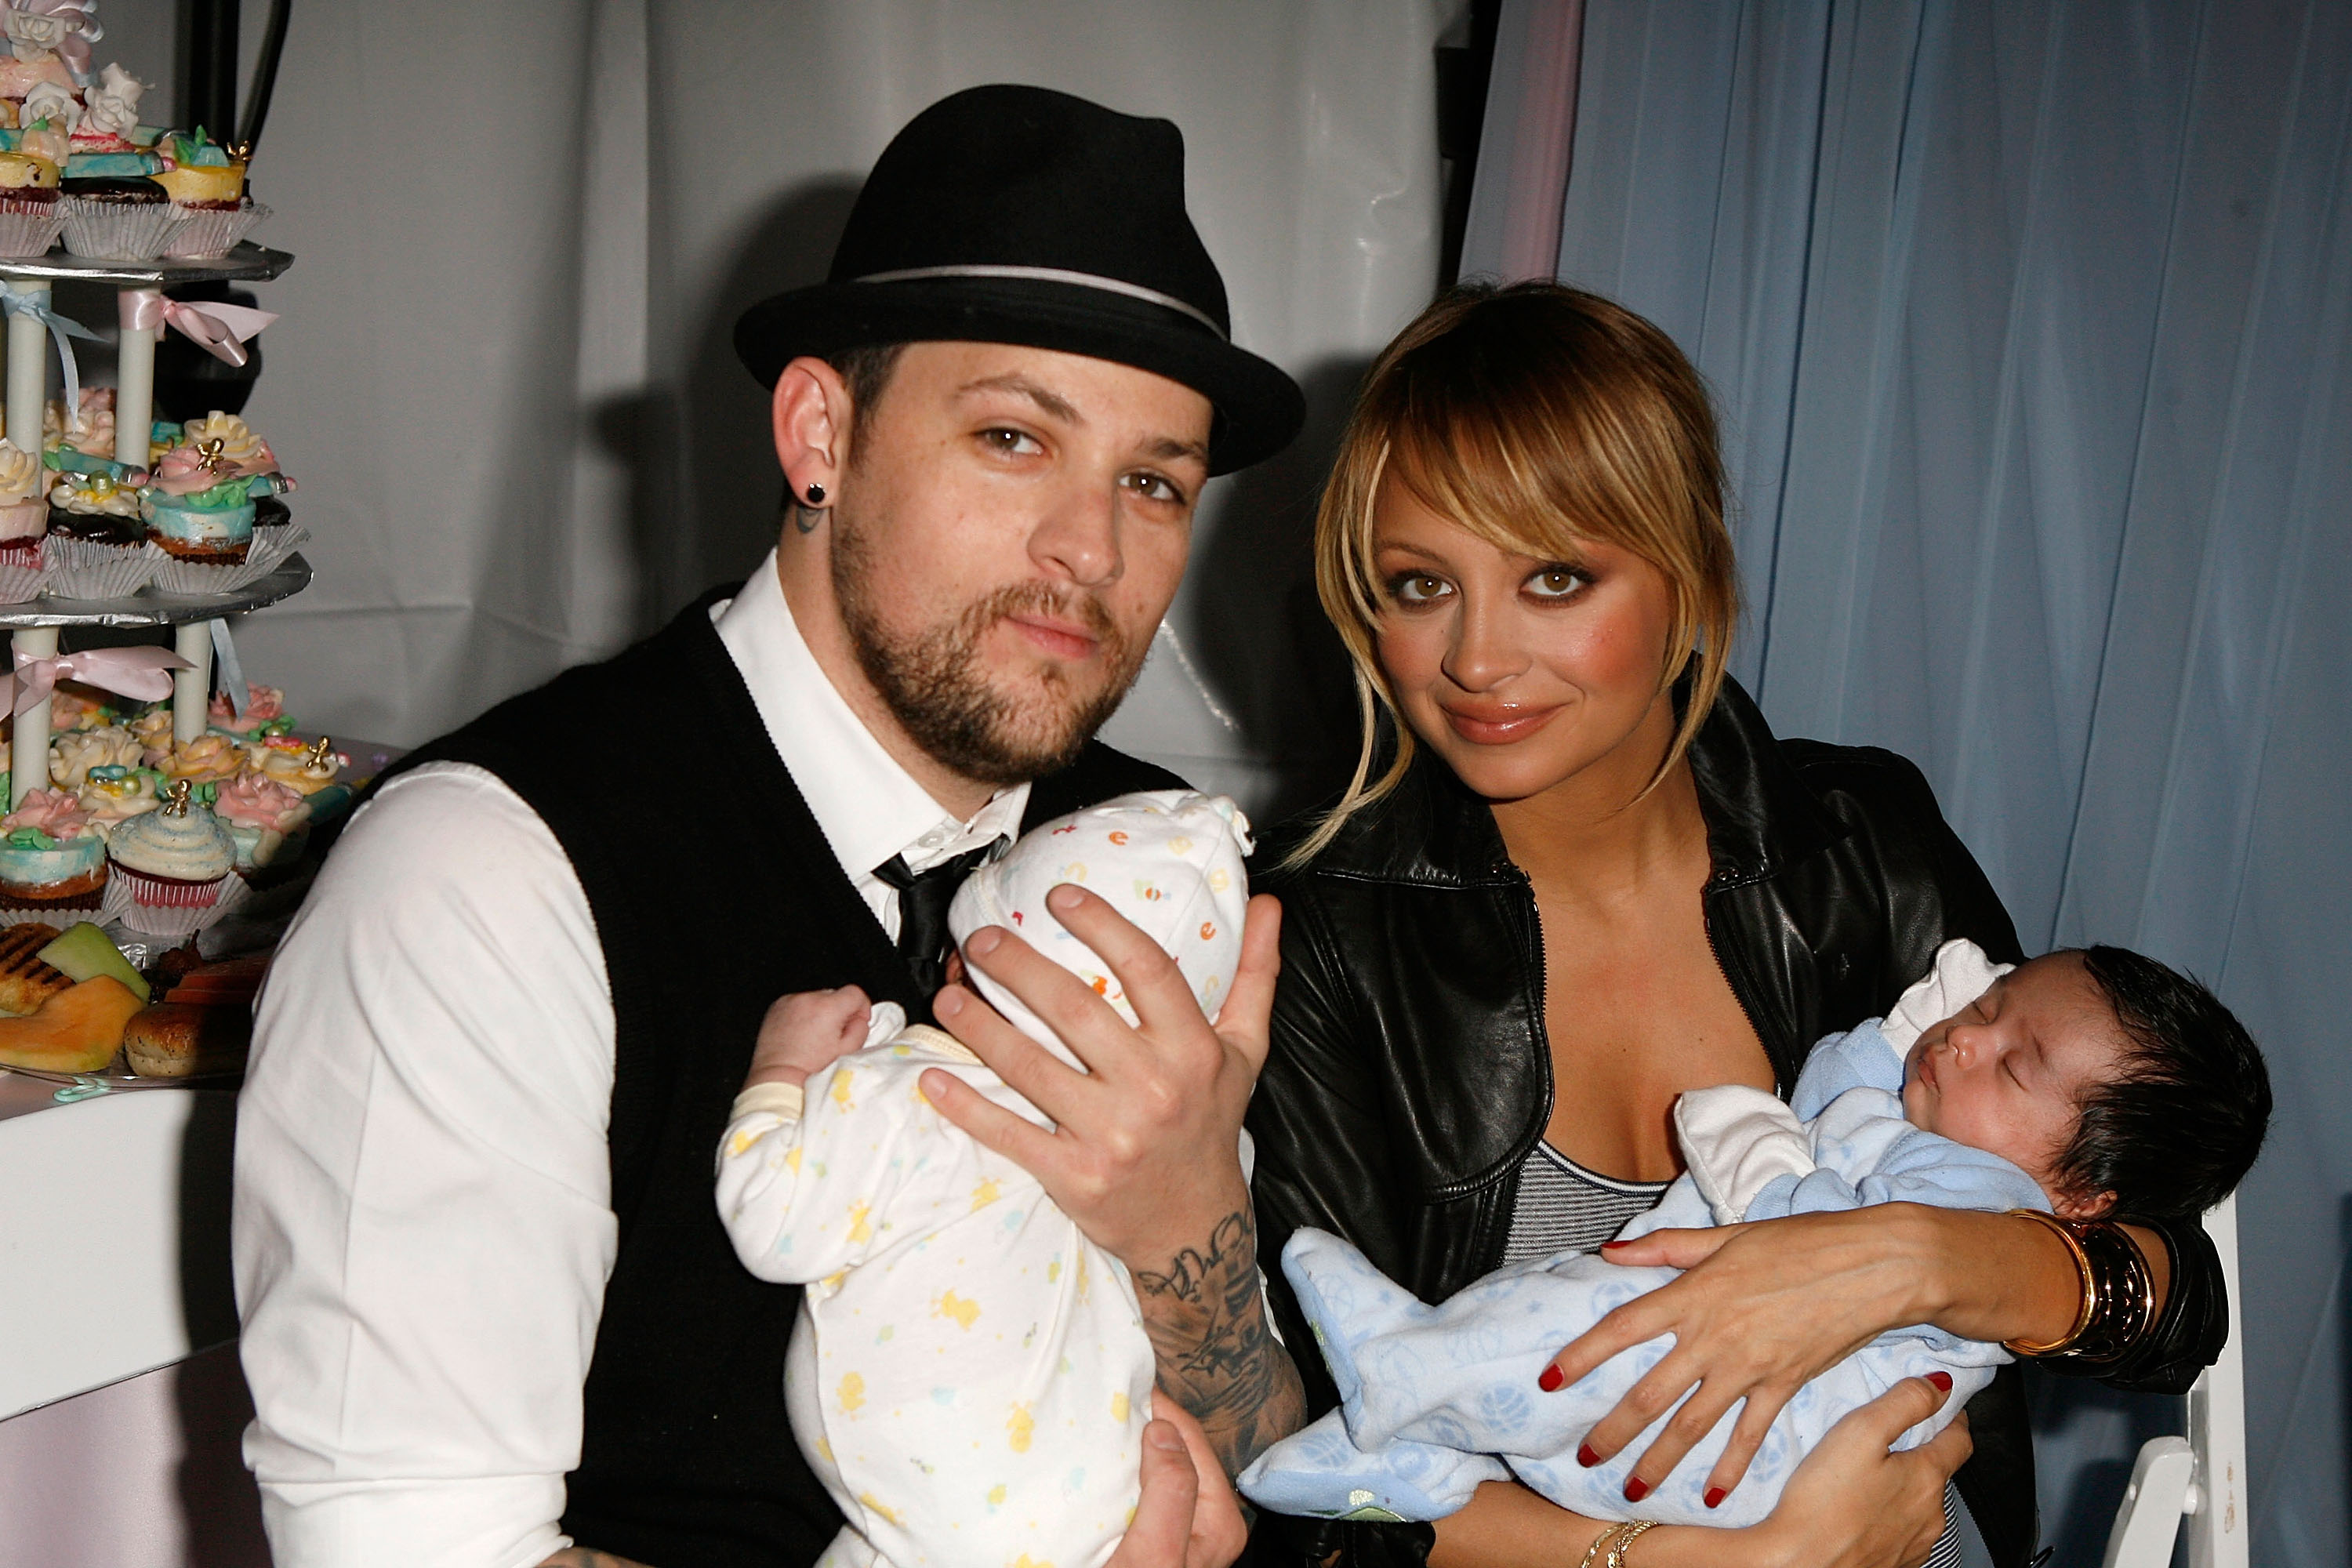 Joel Madden and Nicole Richie at the Launch of Richie-Madden Children's Foundation at Los Angeles Free Clinic on December 3, 2007 in Hollywood, California. | Source: Getty Images